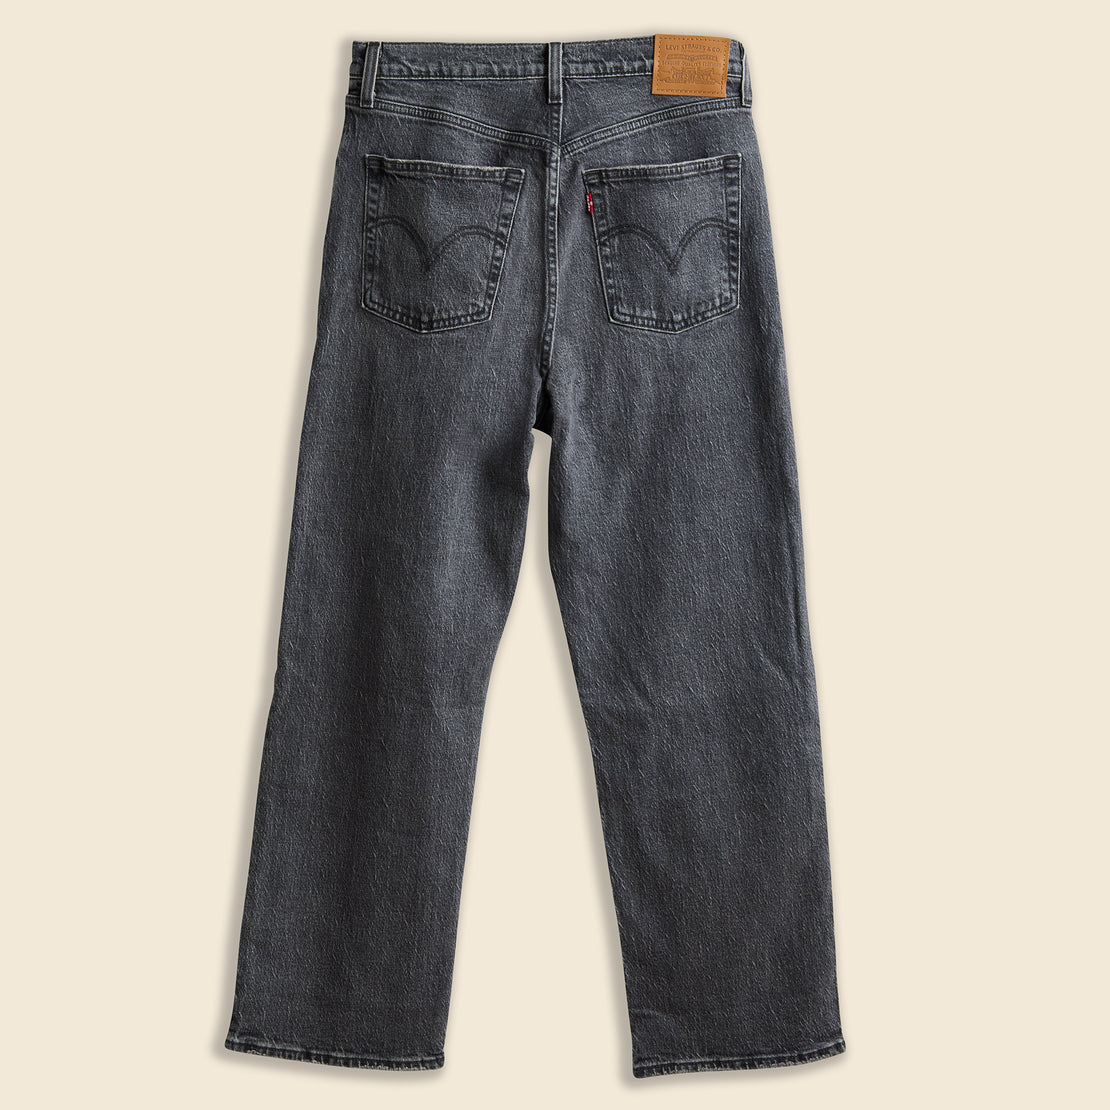 Ribcage Straight Ankle - Black Worn In - Levis Premium - STAG Provisions - W - Pants - Denim